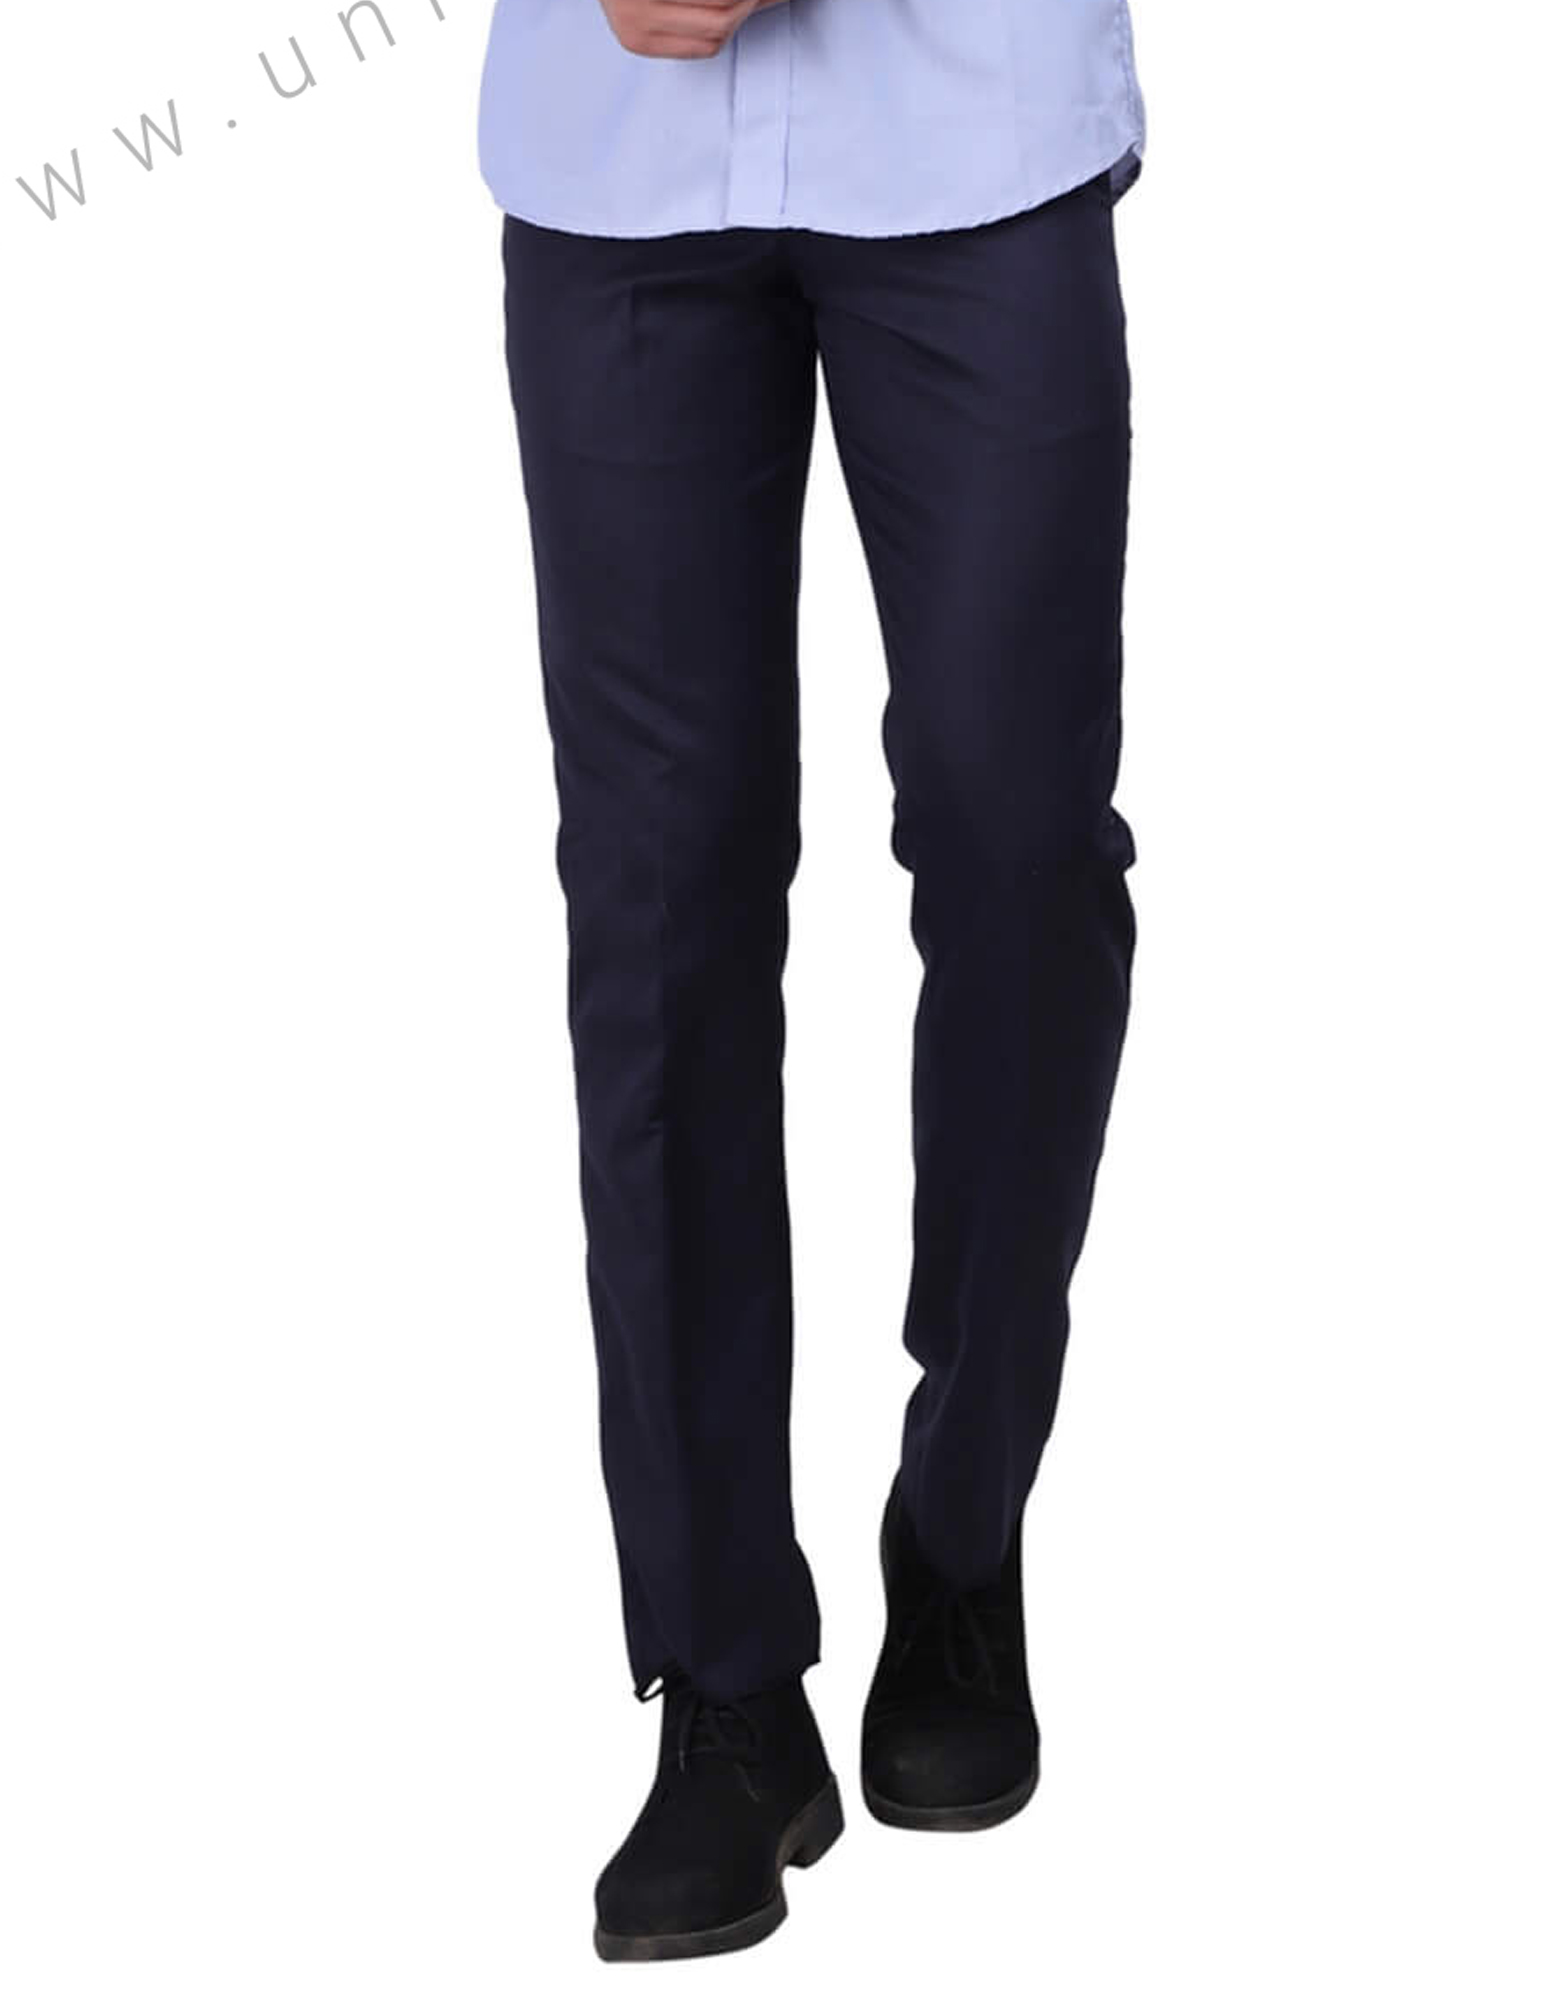 New Blue Slim Suit Pant - The Harrison By After Six In New Blue | The Dessy  Group